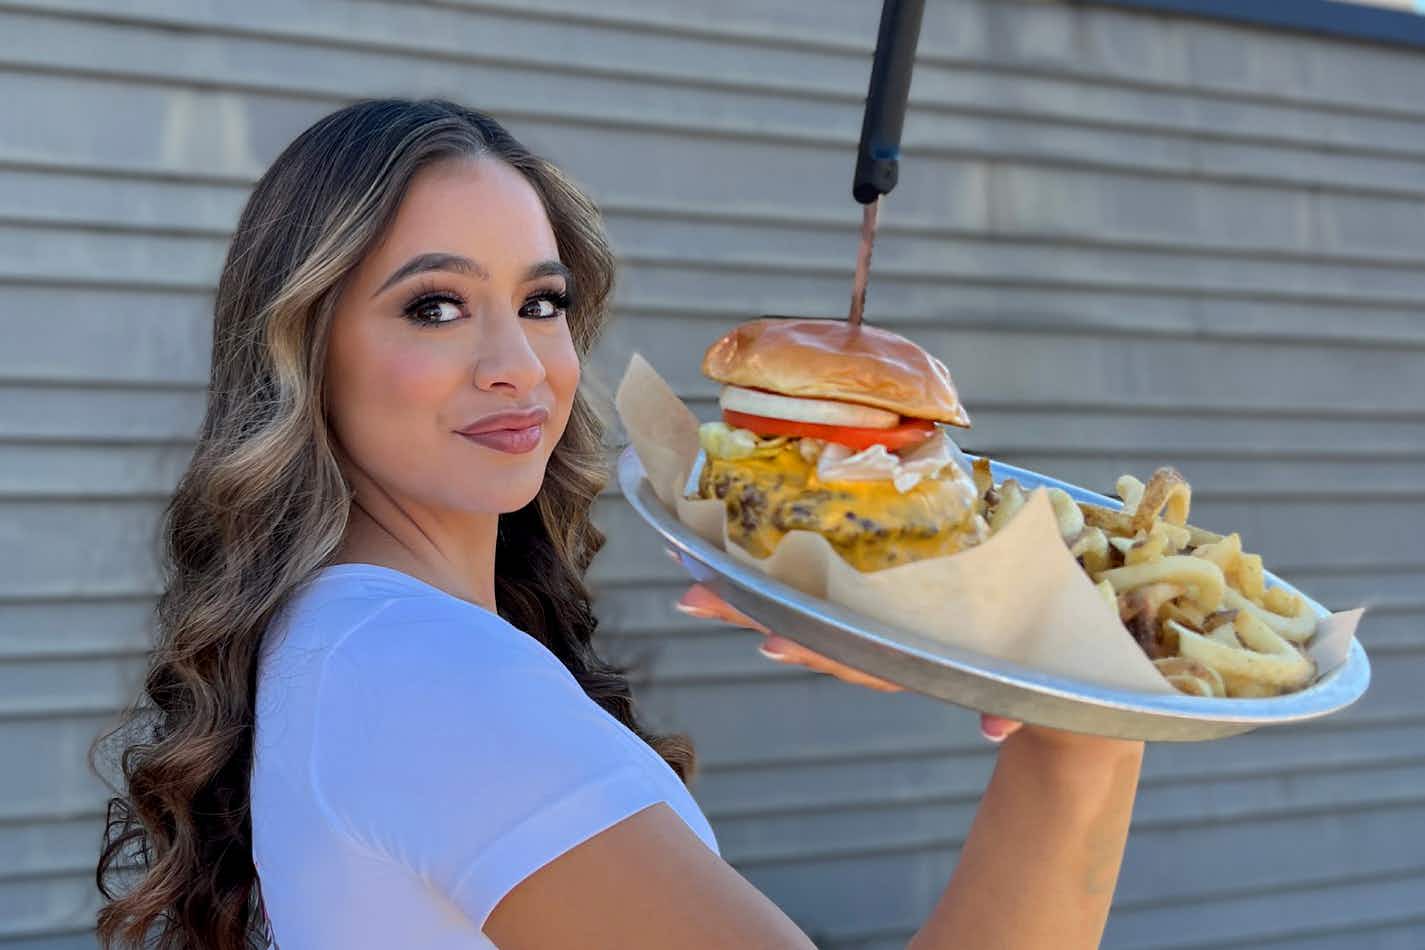 hooters server holding a burger and fries on a tray